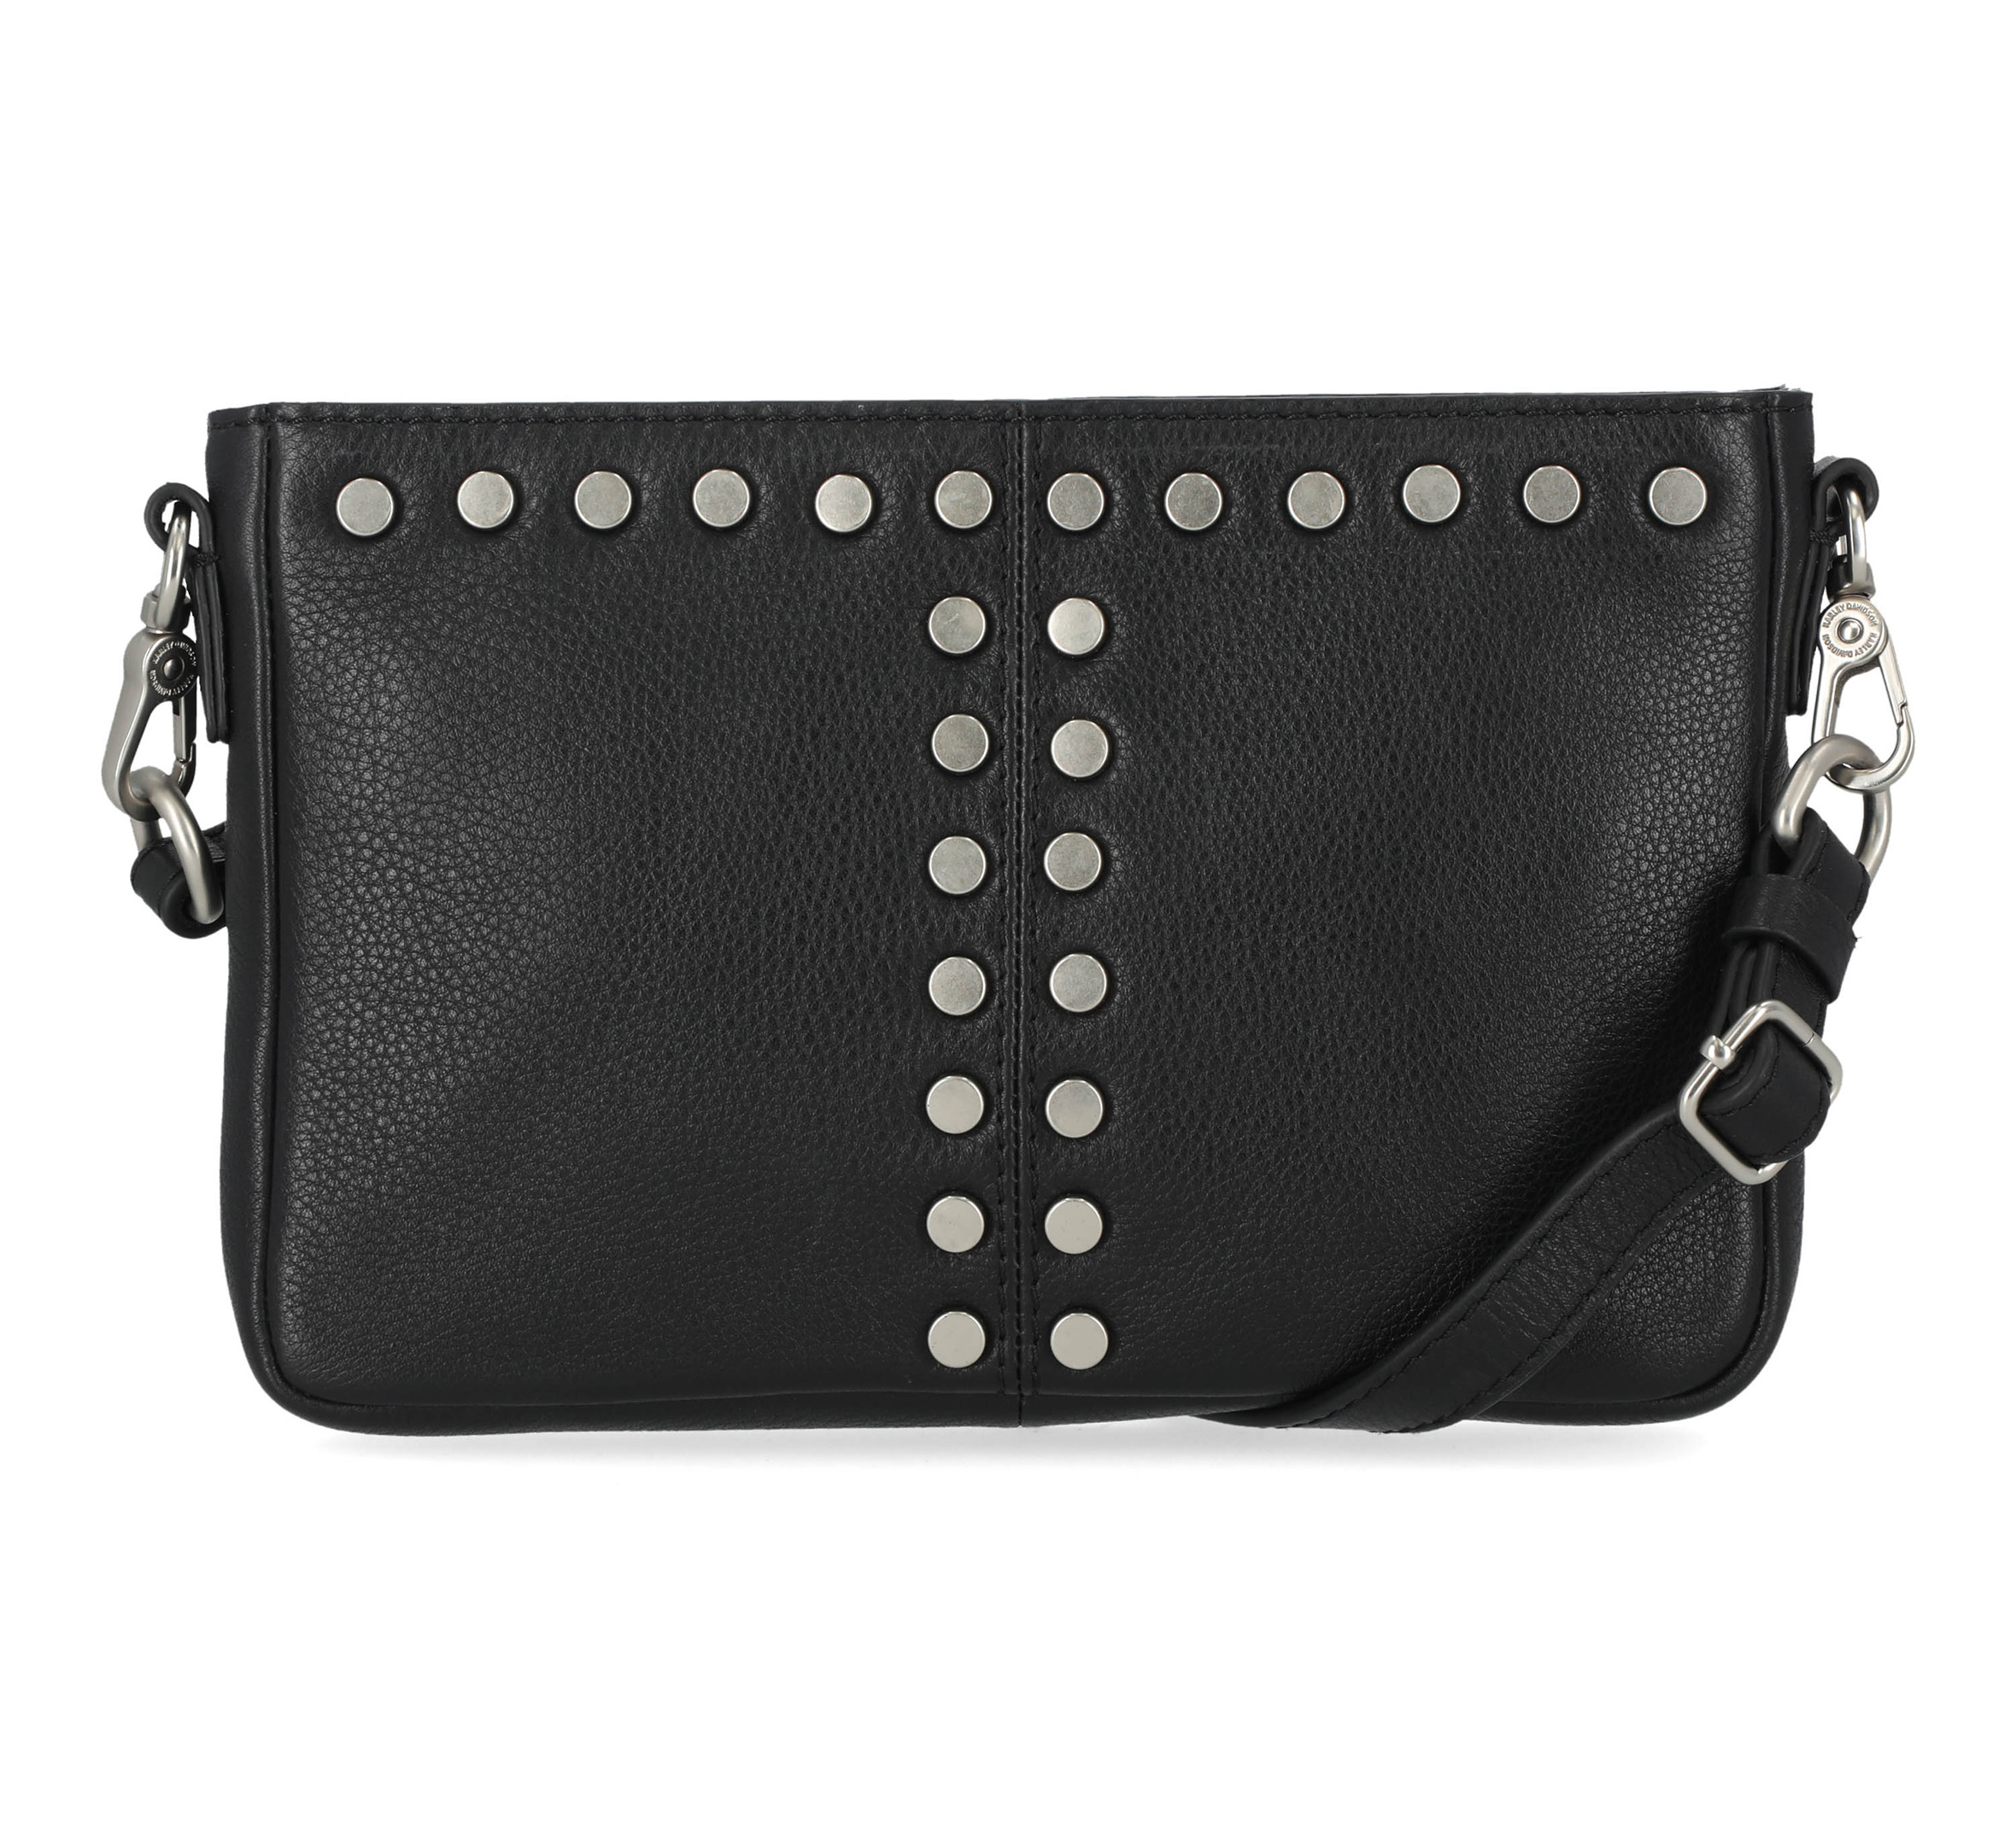 Michael Kors Black Leather Studded Ring Tote Shoulder Bag Purse | Purses  and bags, Bags, Leather